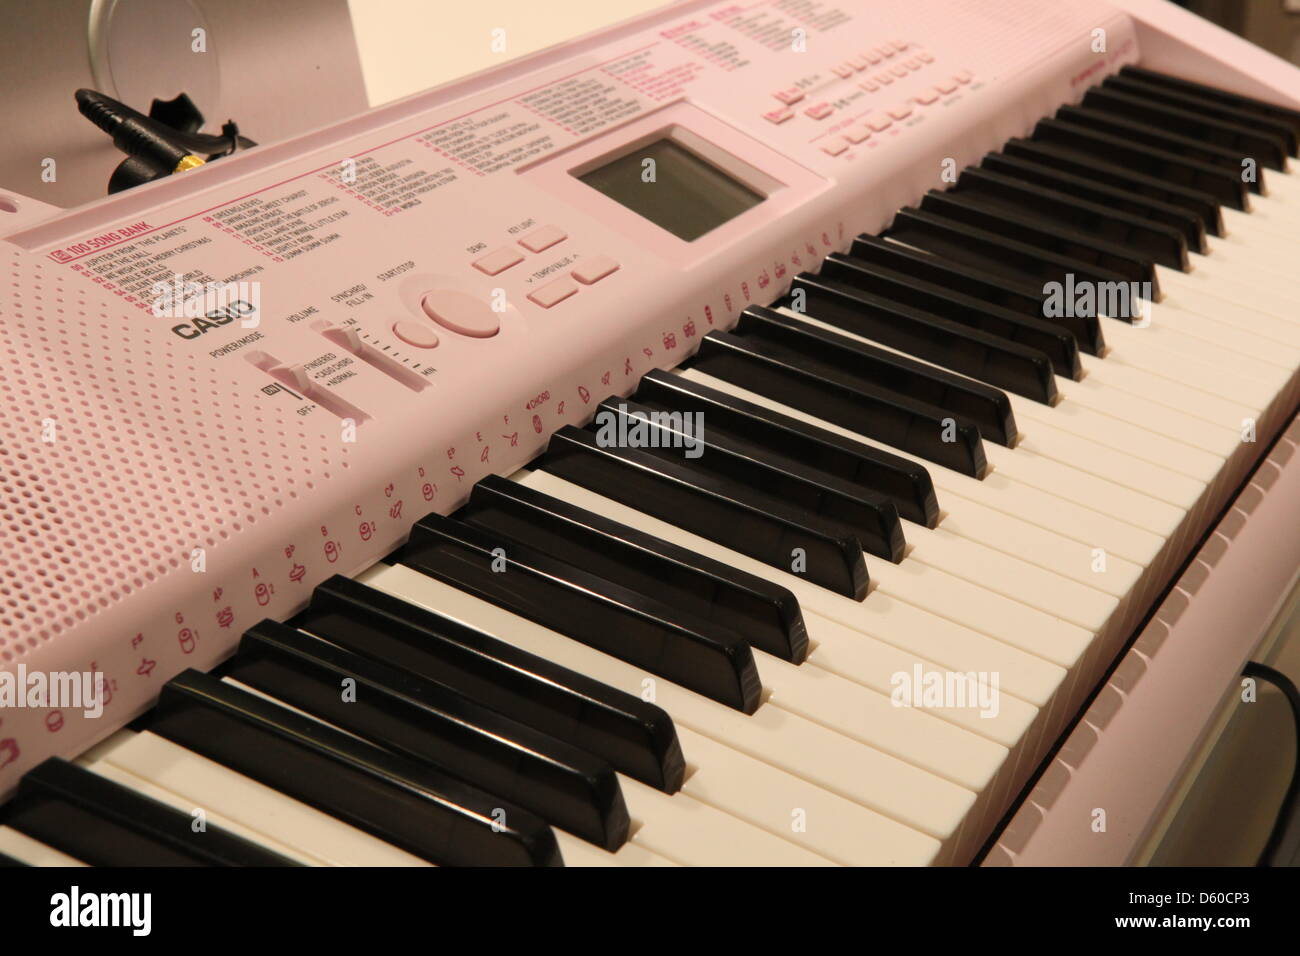 A pink-coloured keyboard of Casio is on display the music trade fair in Frankfurt Main, Germany, 10 April 2013. Photo: Susannah V. Vergau Stock Photo - Alamy